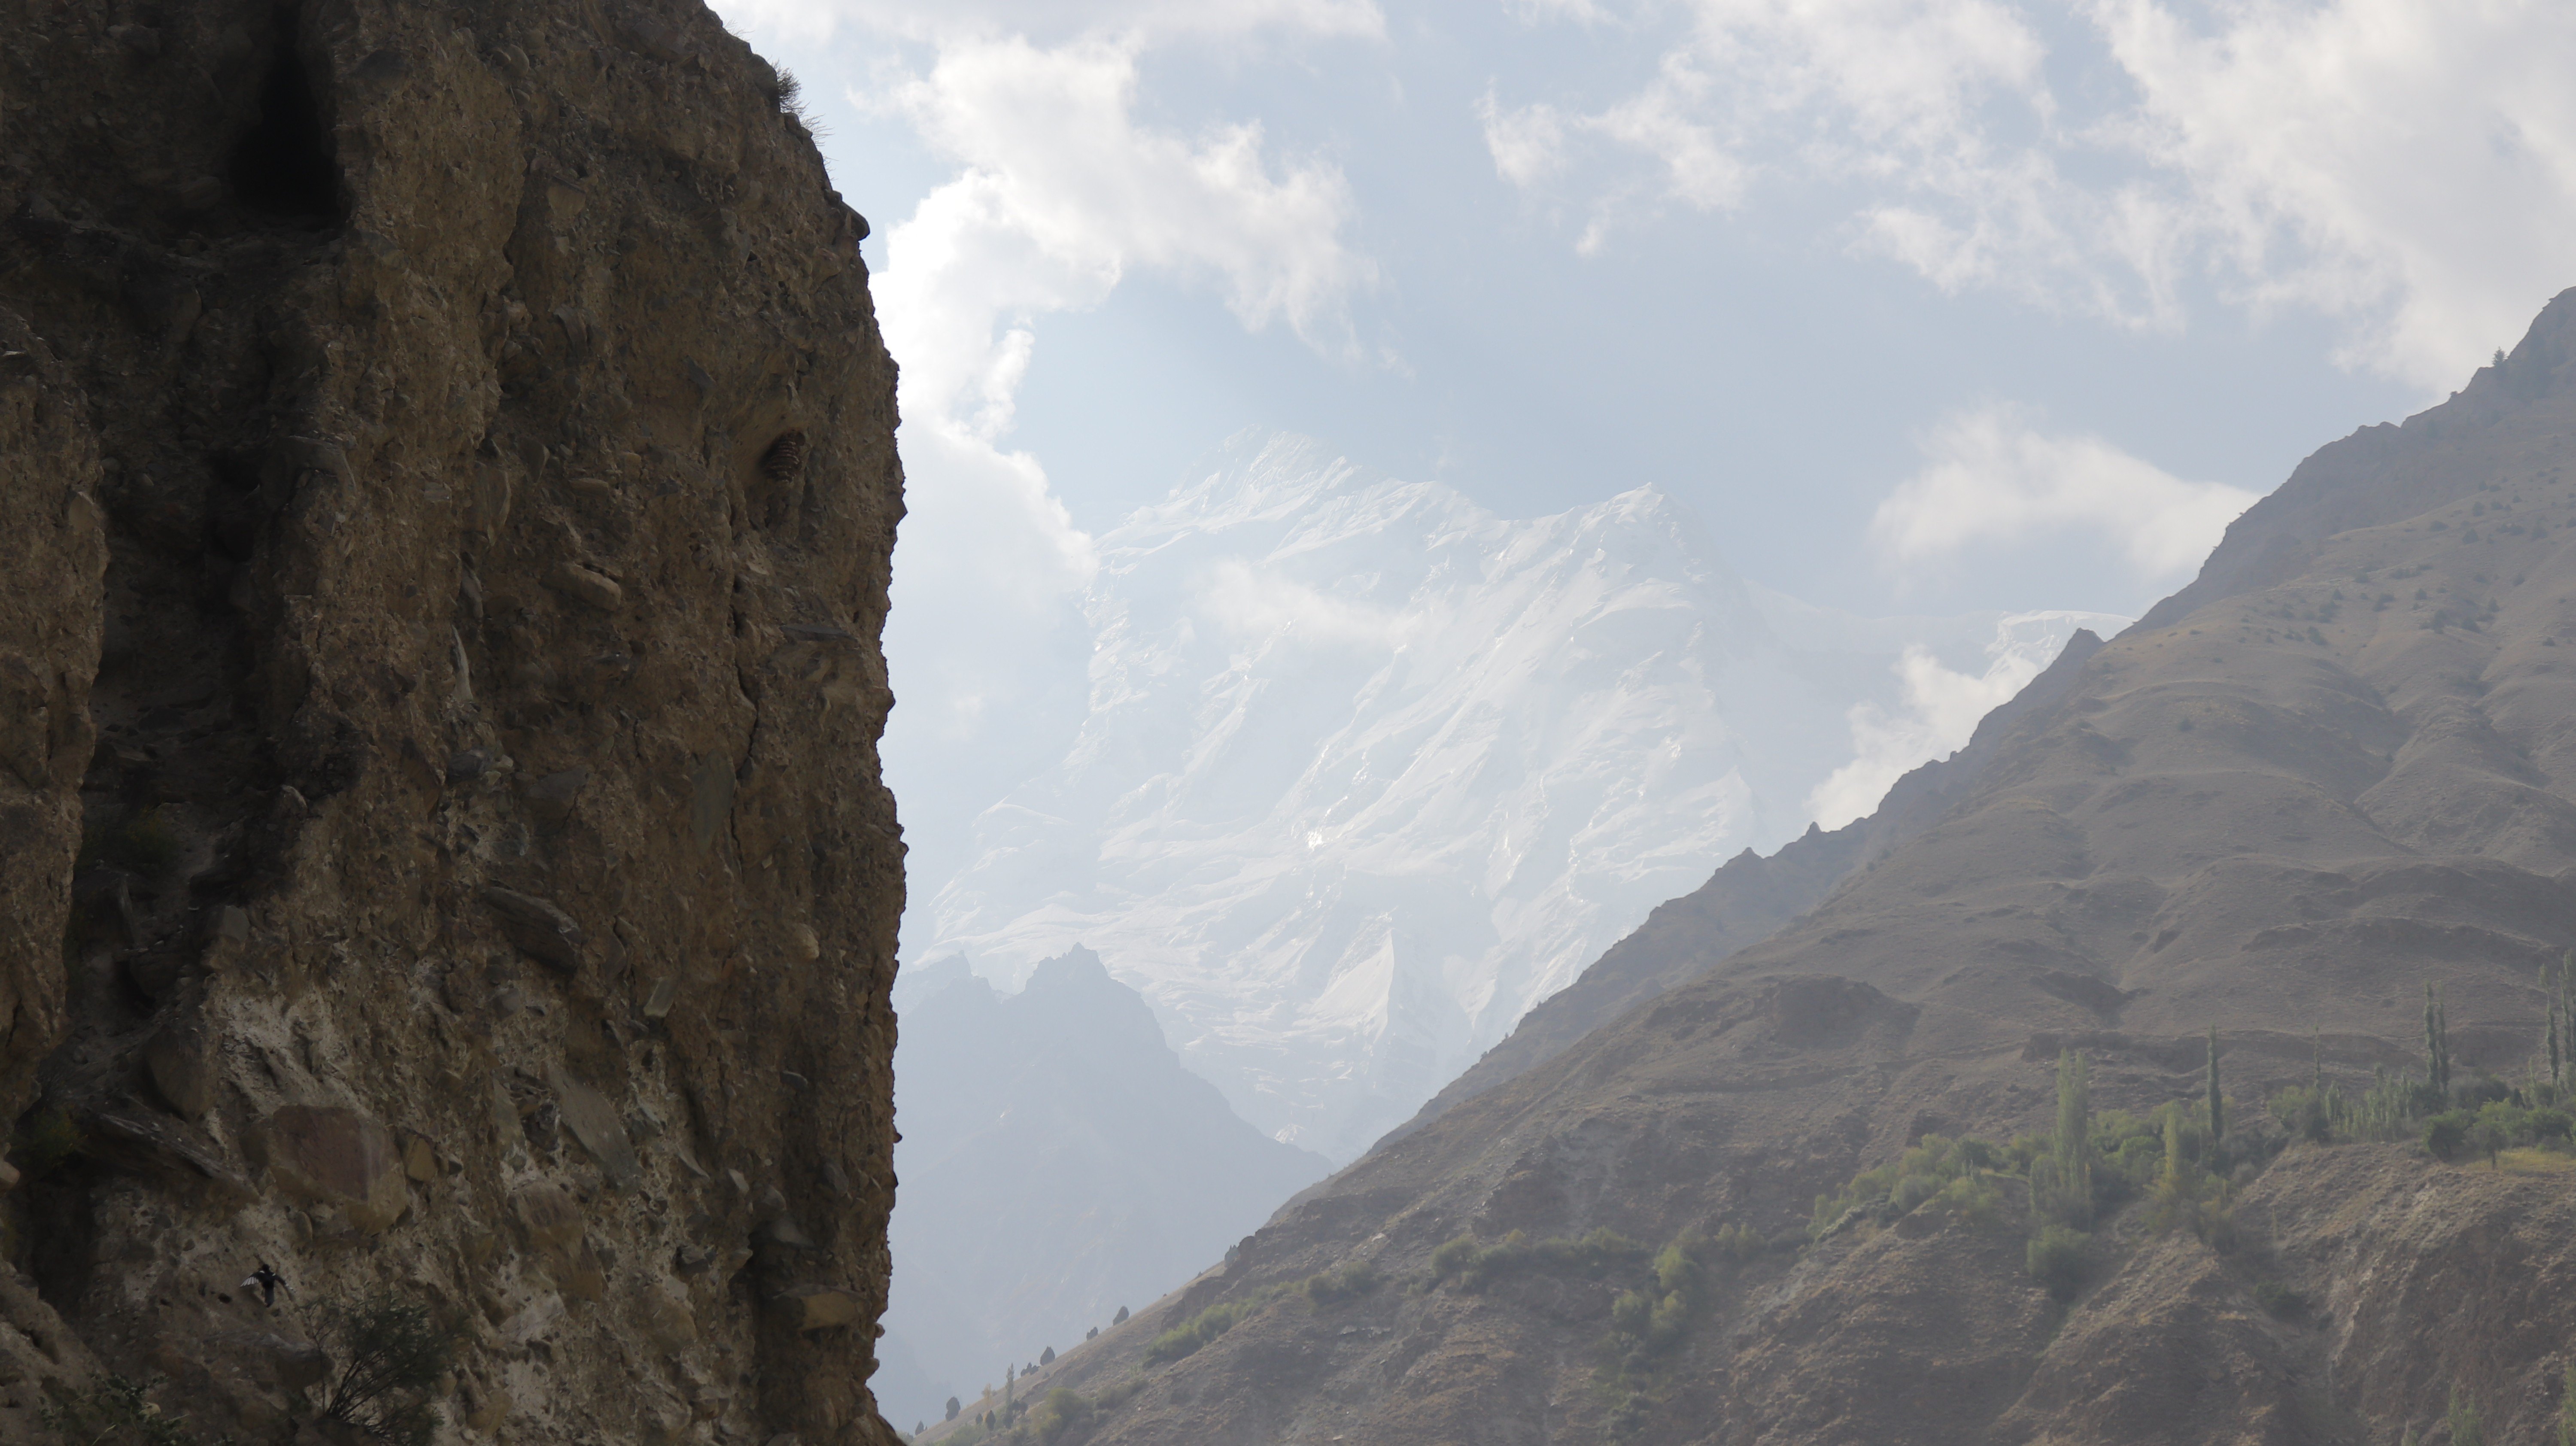 The panoramic view of nanga parbat with the height of about 8143 meters.